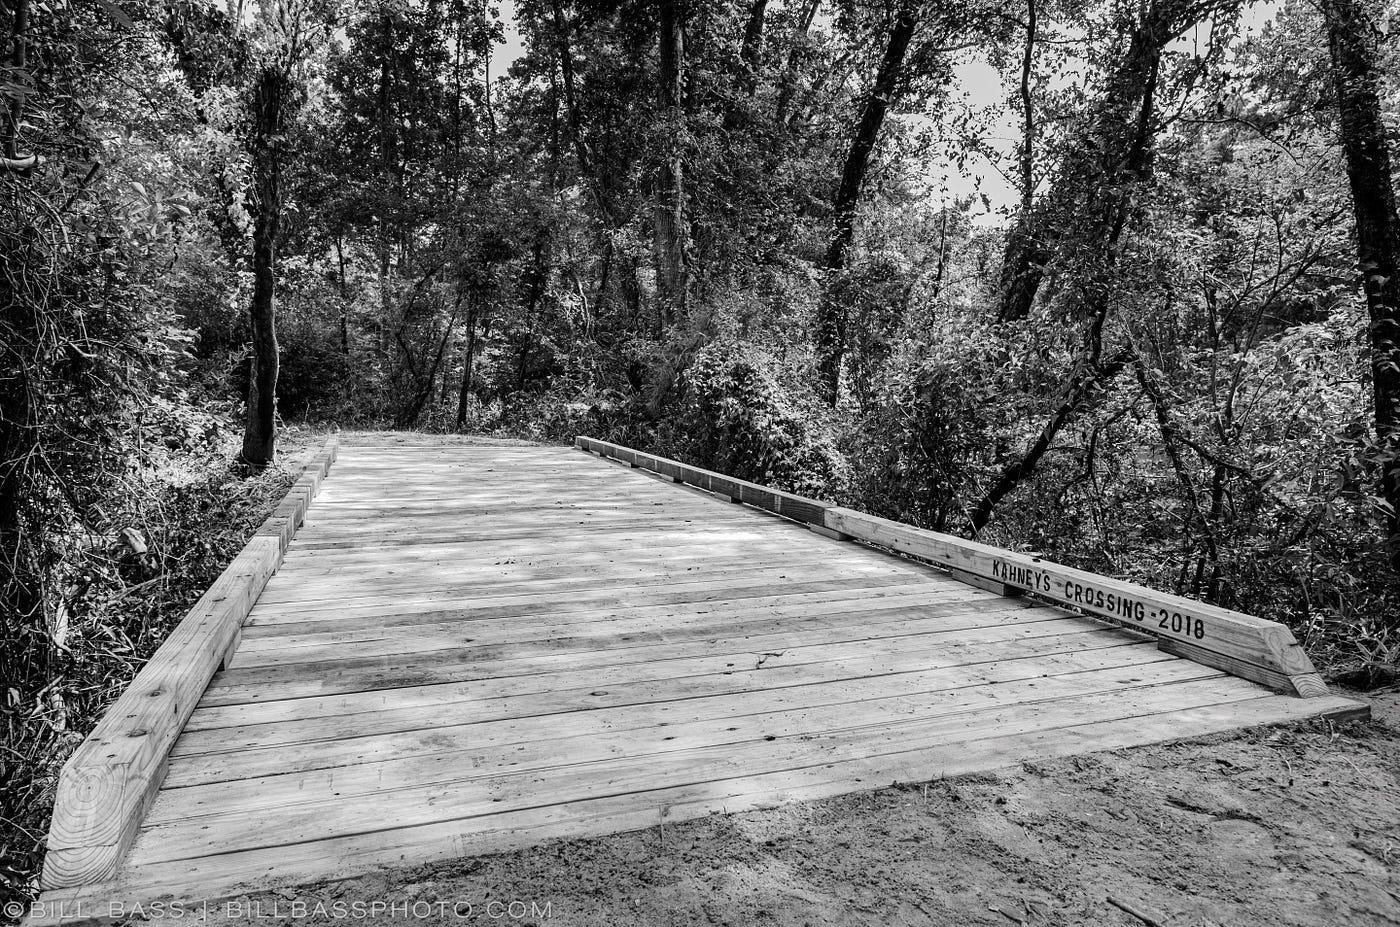 The 29 foot Kahney’s Crossing bridge along the Spring Creek Nature Trail.